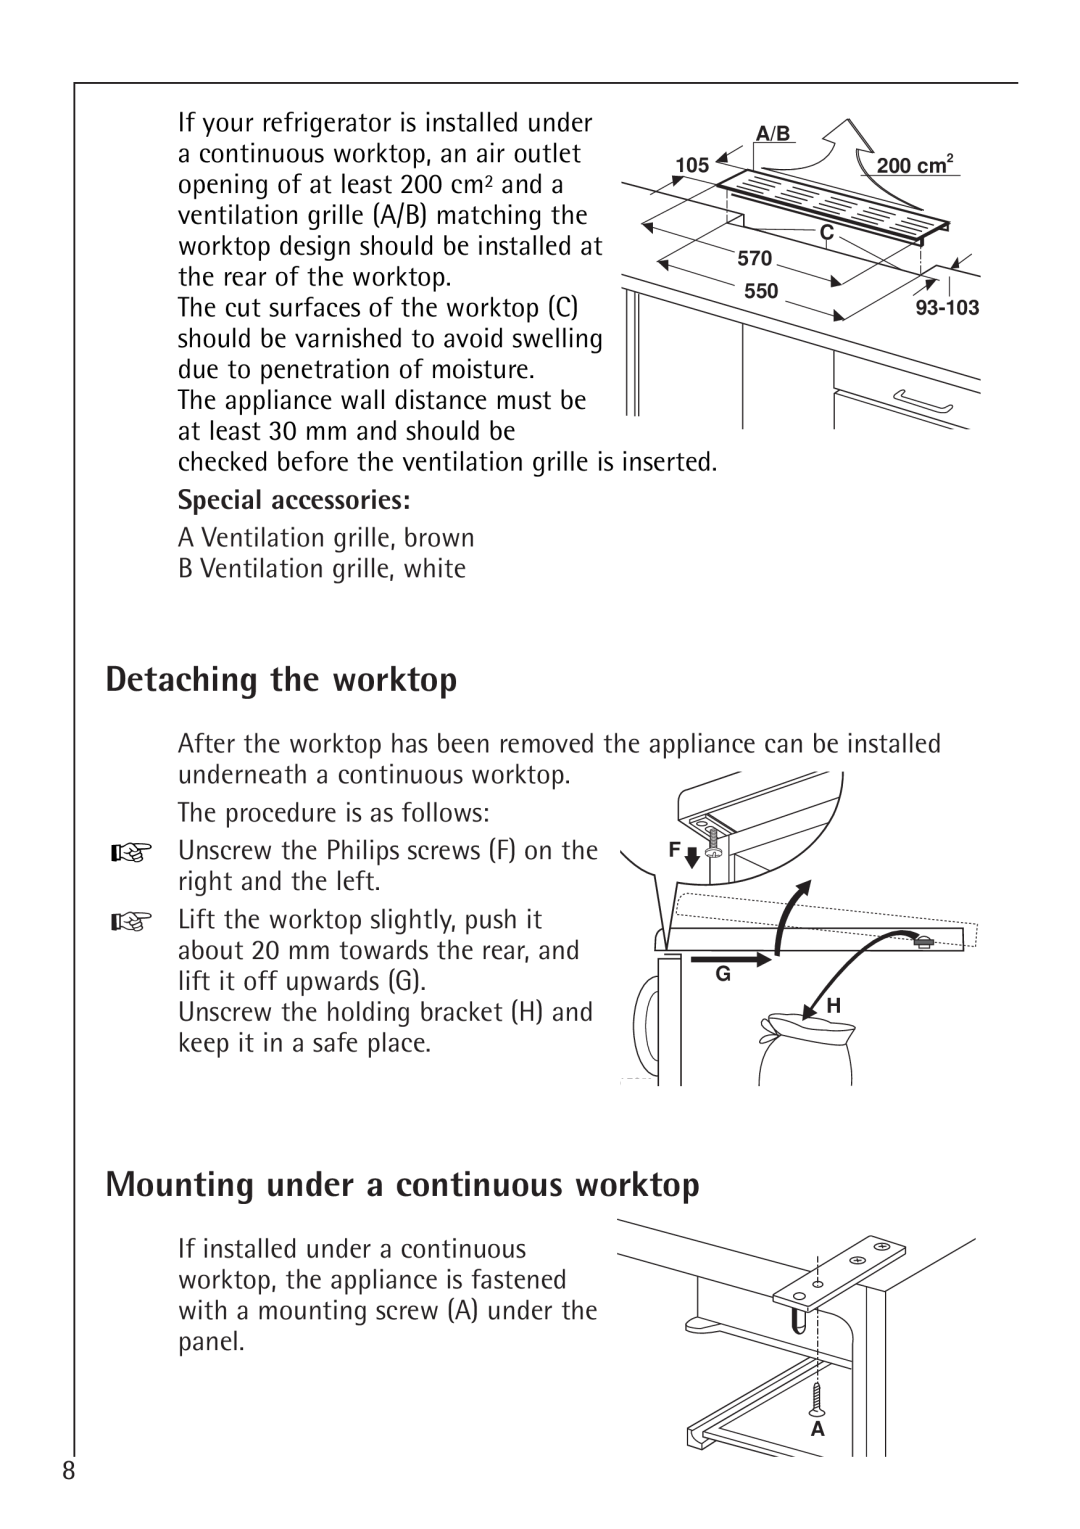 AEG 1450-7 TK manual Detaching the worktop, Mounting under a continuous worktop, Special accessories 